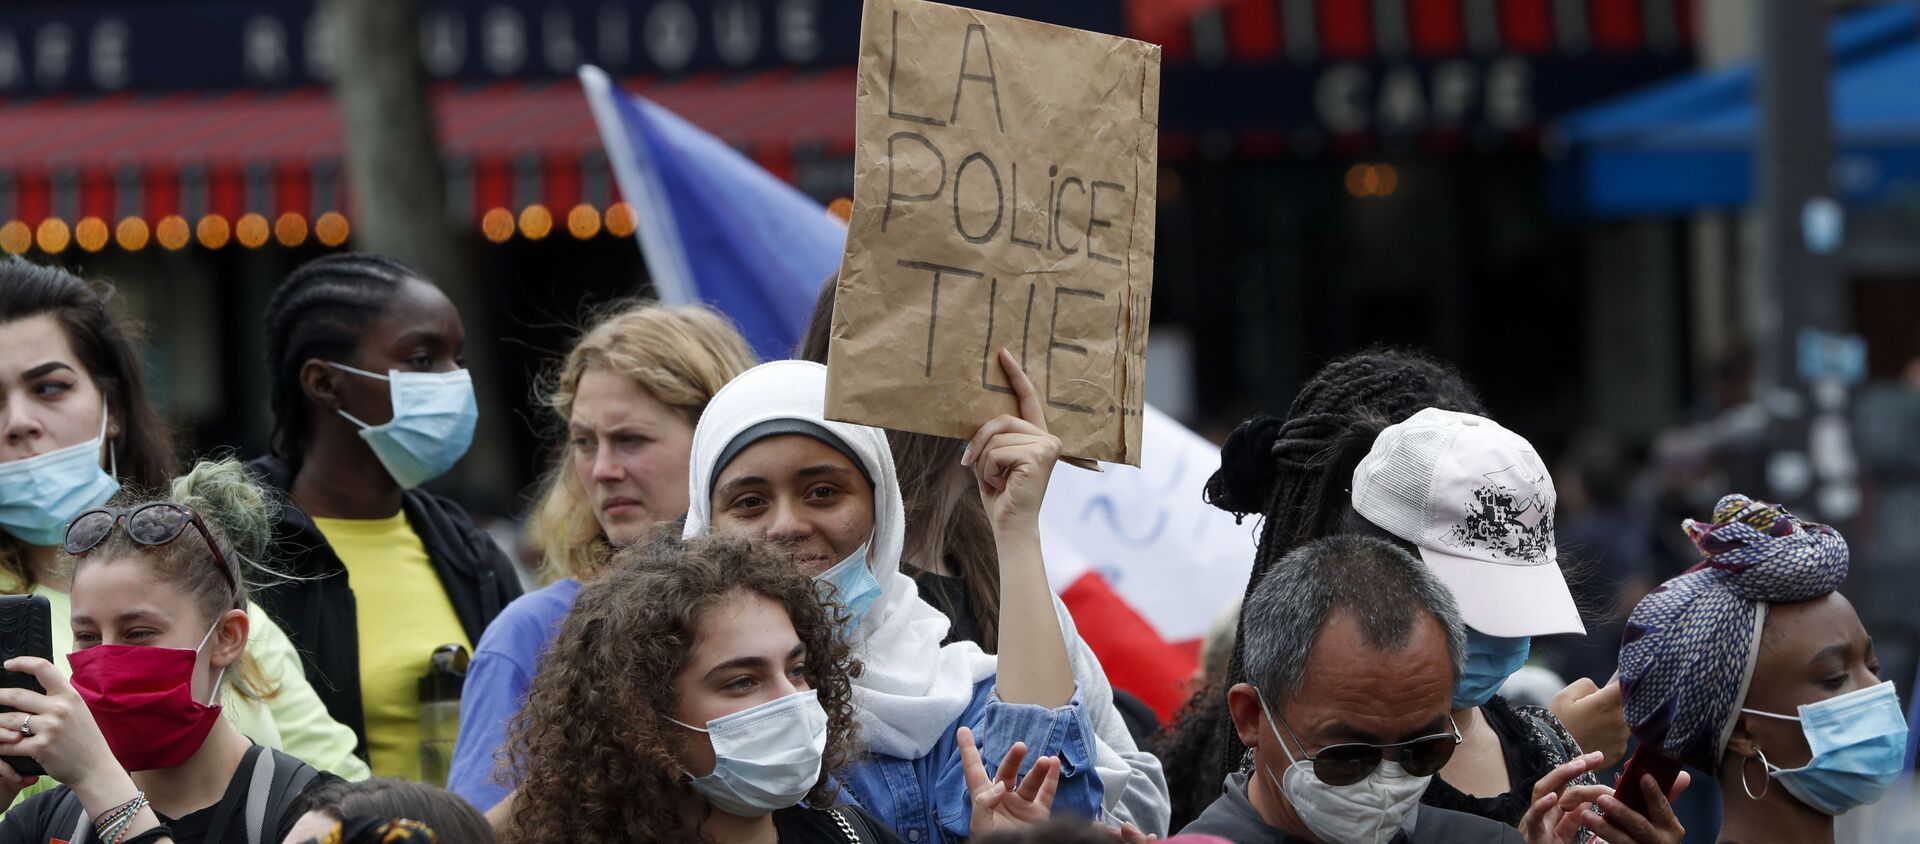 A placard read The Police Kills as people gather for a march against police brutality and racism in Paris, France - Sputnik International, 1920, 13.06.2020